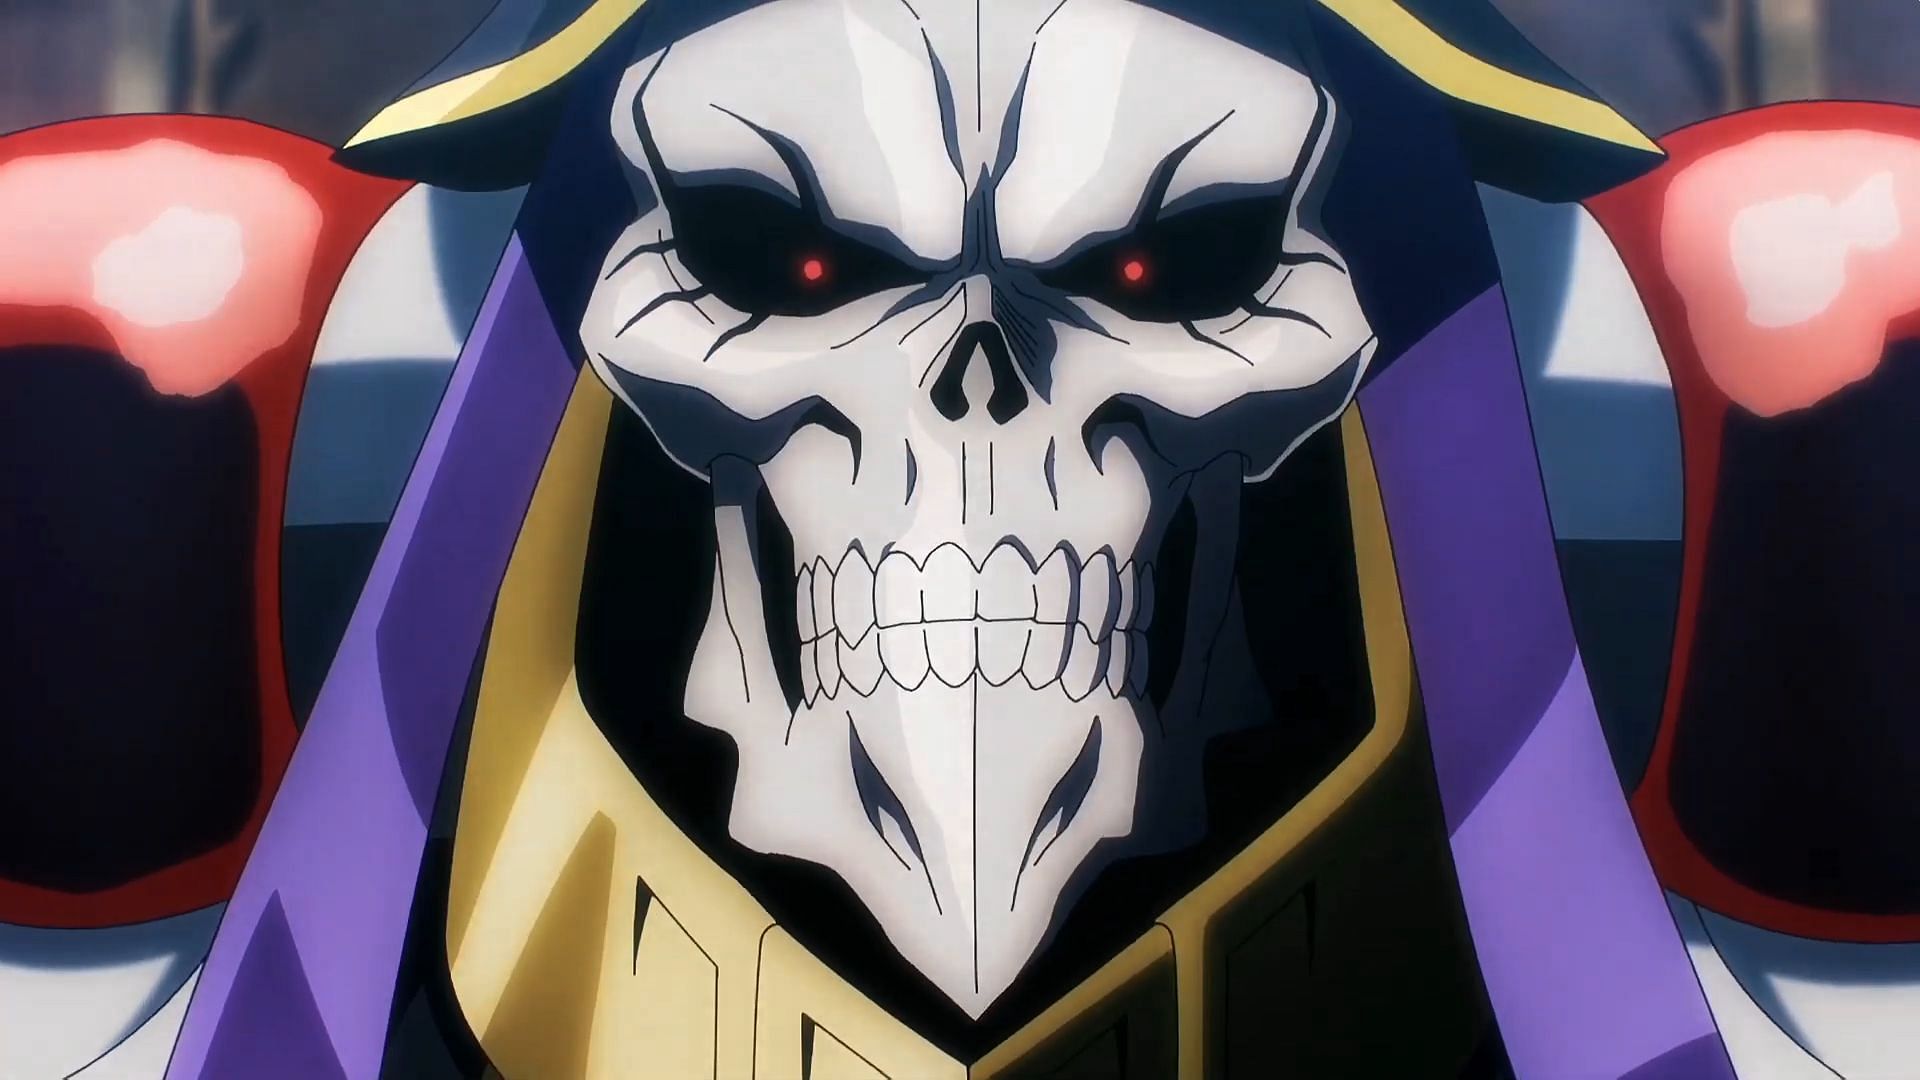 Overlord IV Tops Summer 2022 Anime Rankings in Week 11 for the First Time   Anime Corner